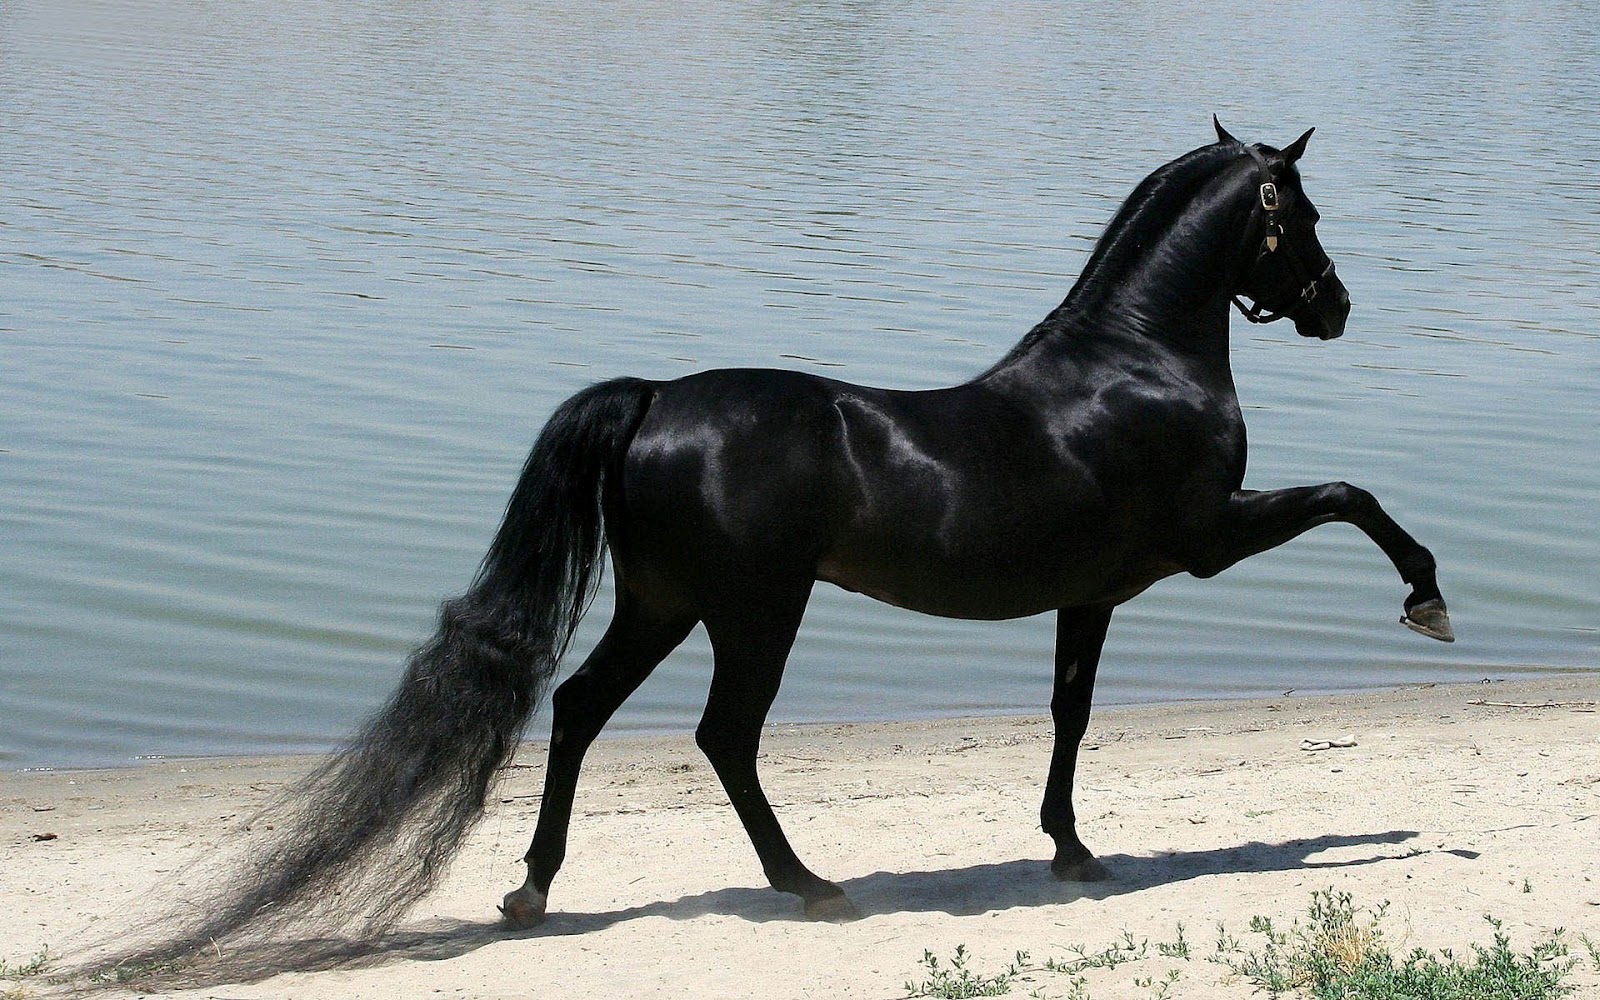 All Wallpapers: Black Horse New Best hd Wallpapers 2013